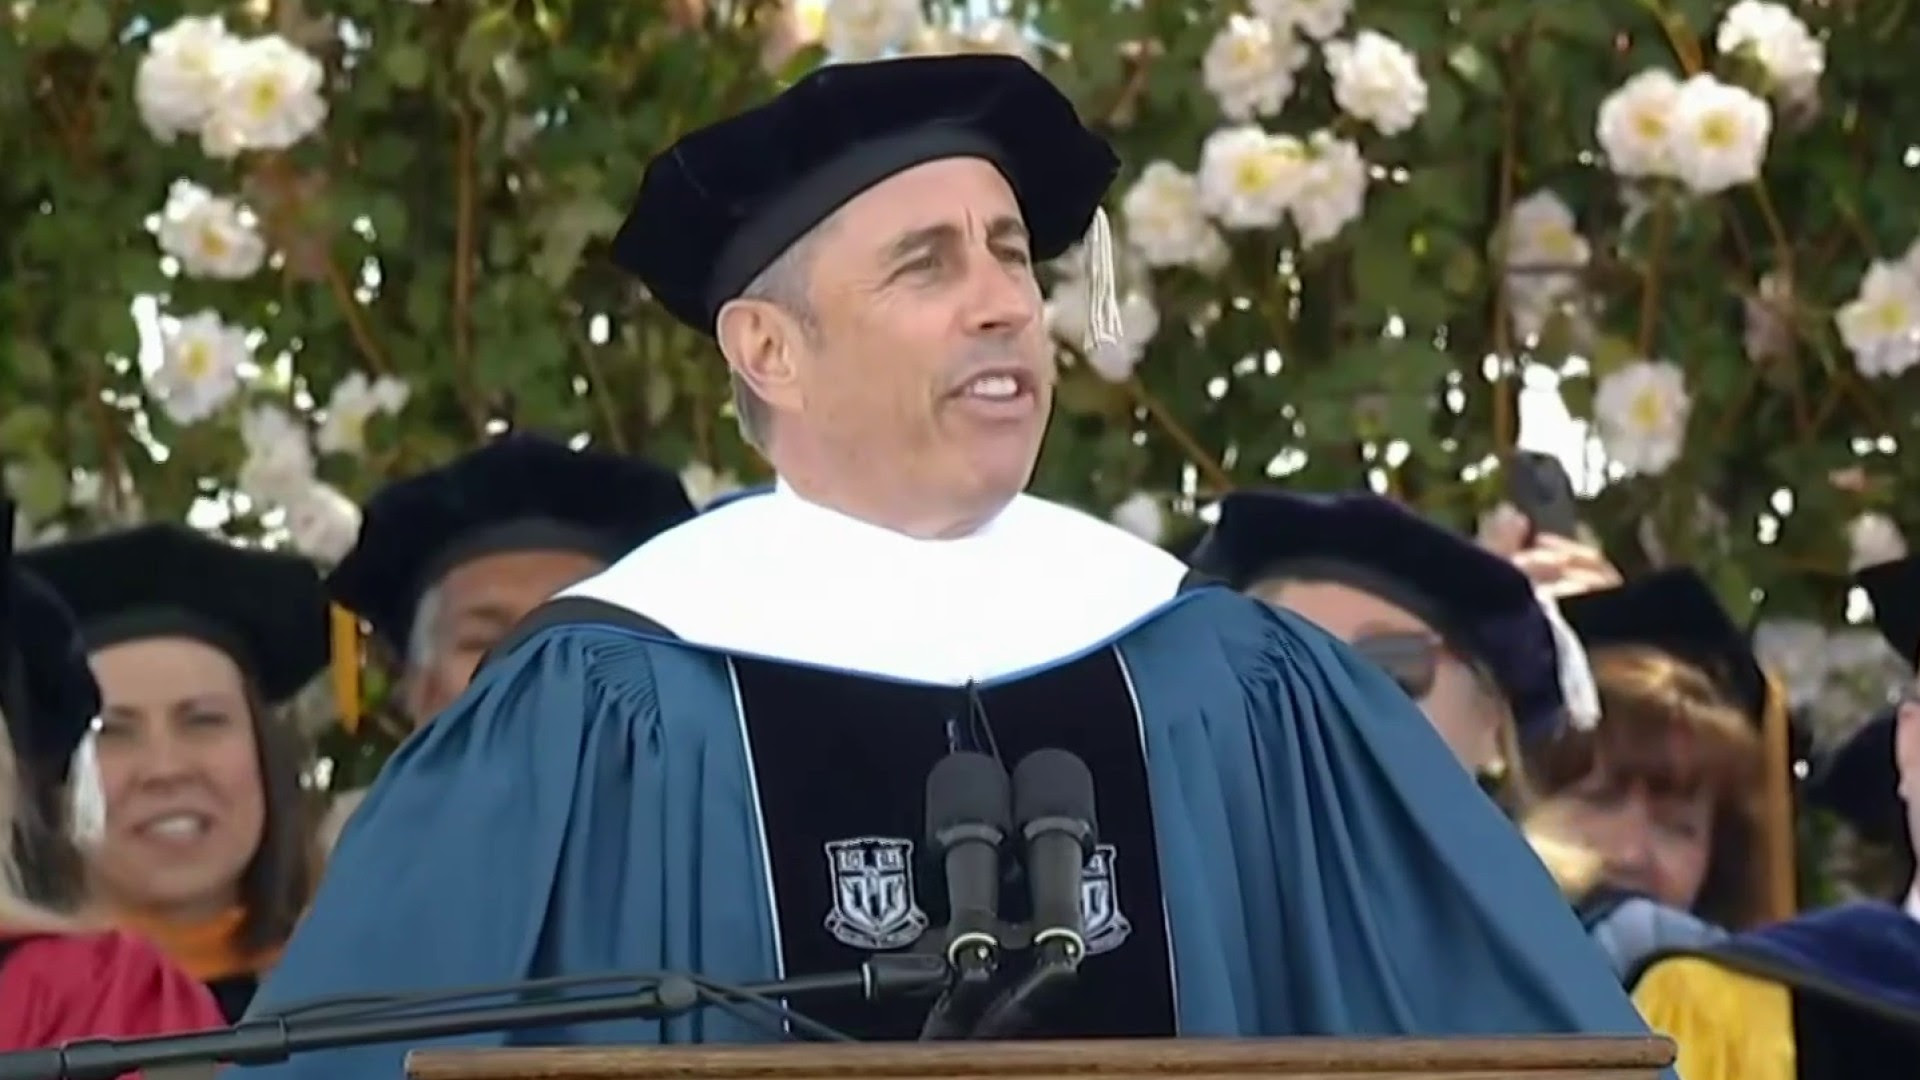 Duke students walked out of Jerry Seinfeld's commencement speech amid wave of antiwar protests 1715558008998_nn_elo_jerry_seinfeld_protested_at_duke_240512_1920x1080-byqi35